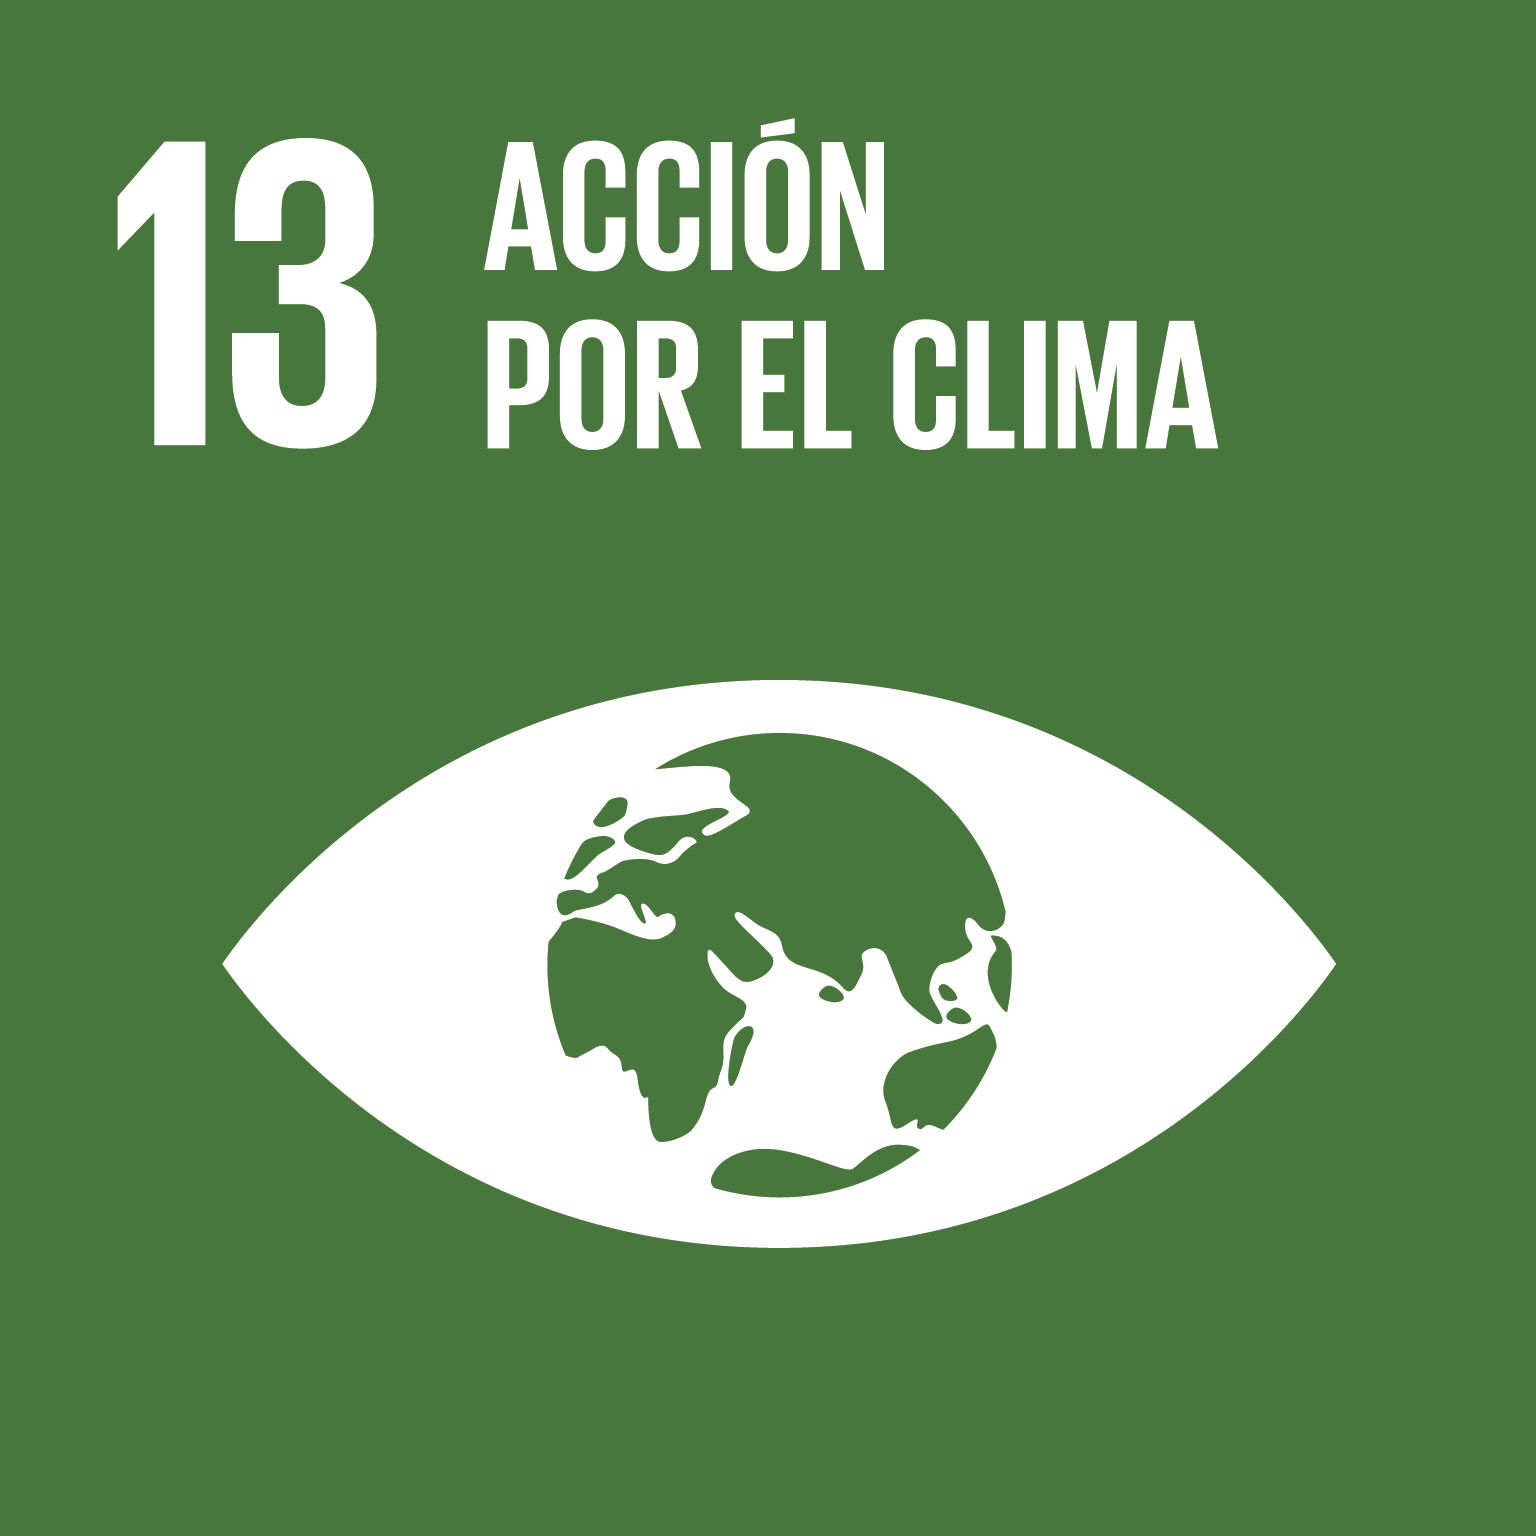 icon for Goal 13 - Take urgent action to combat climate change and its impacts.